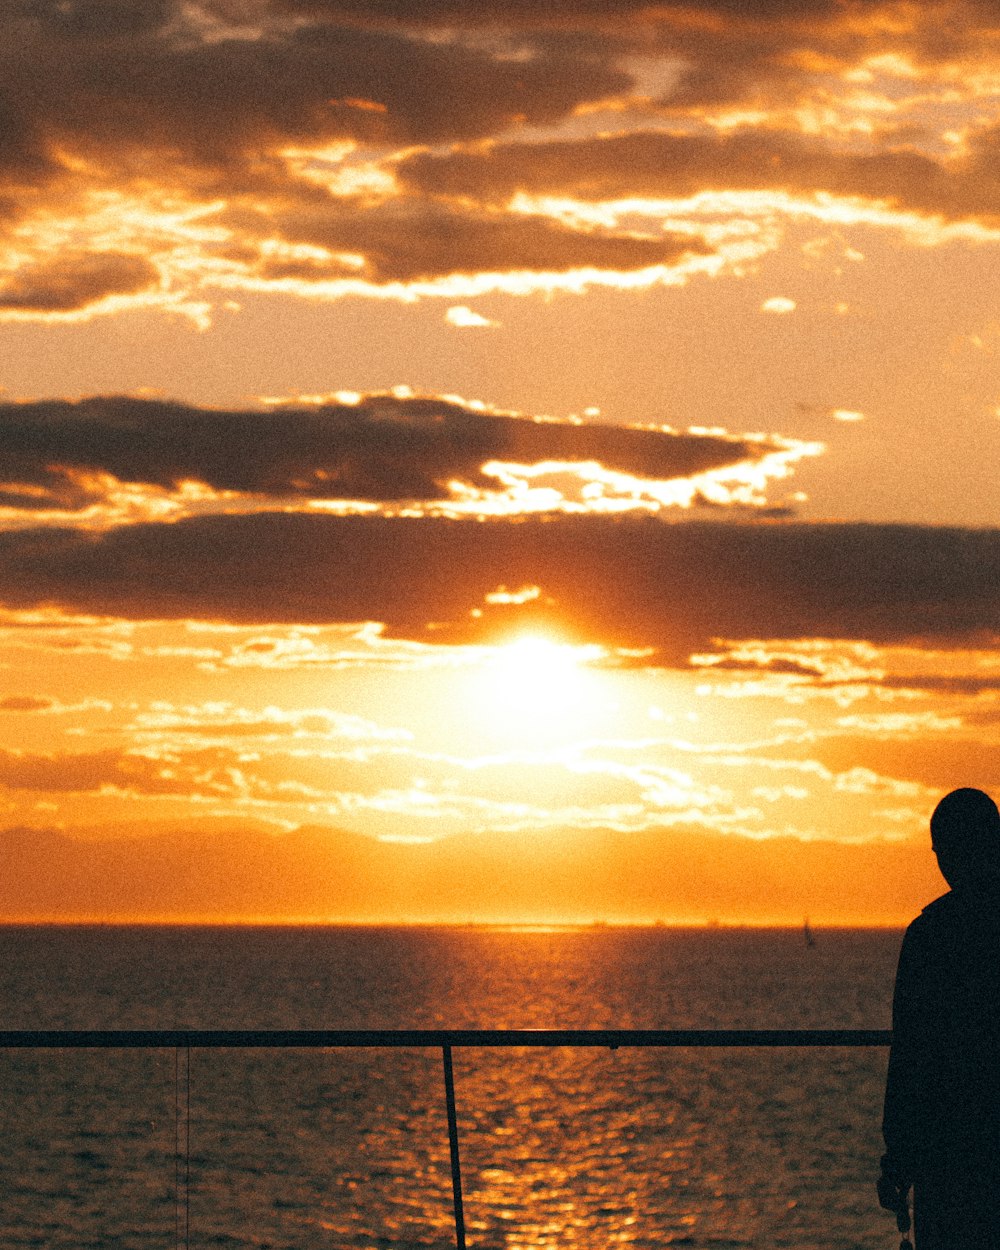 silhouette of man standing near body of water during sunset